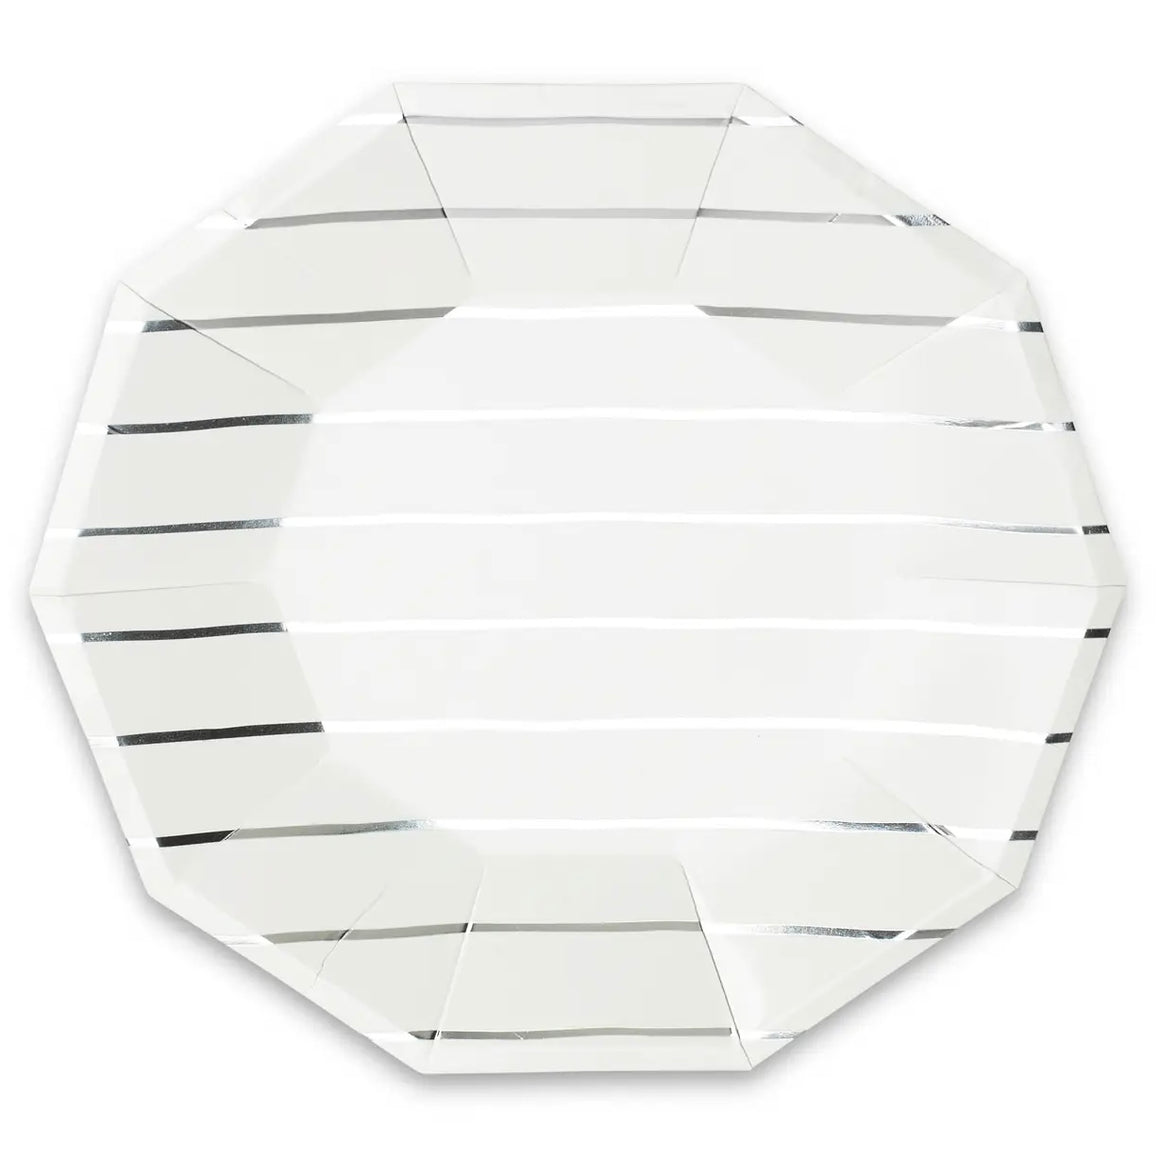 PLATES LARGE - SILVER DAYDREAM SOCIETY FRENCHIE STRIPES